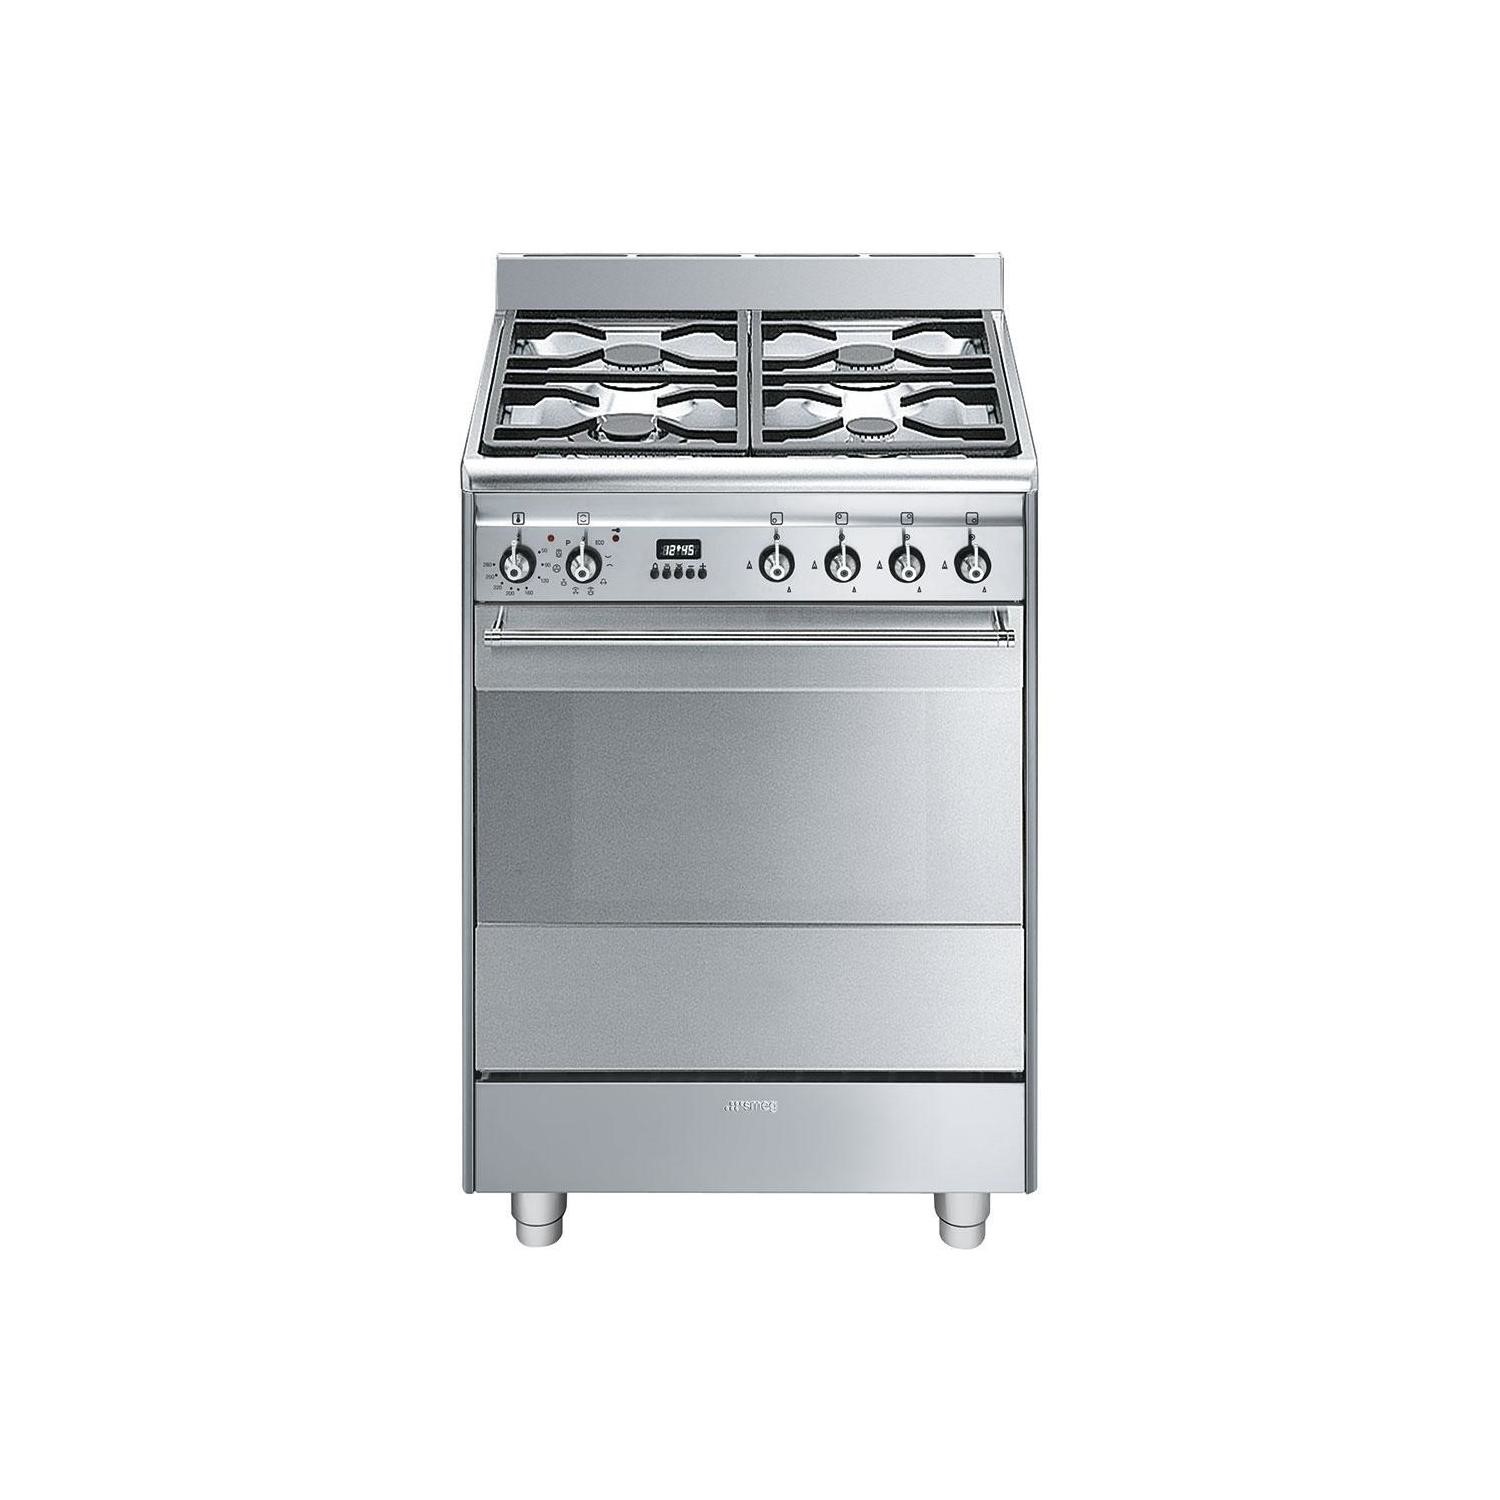 Refurbished Smeg Concert SUK61PX8 60cm Dual Fuel Cooker with Pyrolytic Cleaning Stainless Steel